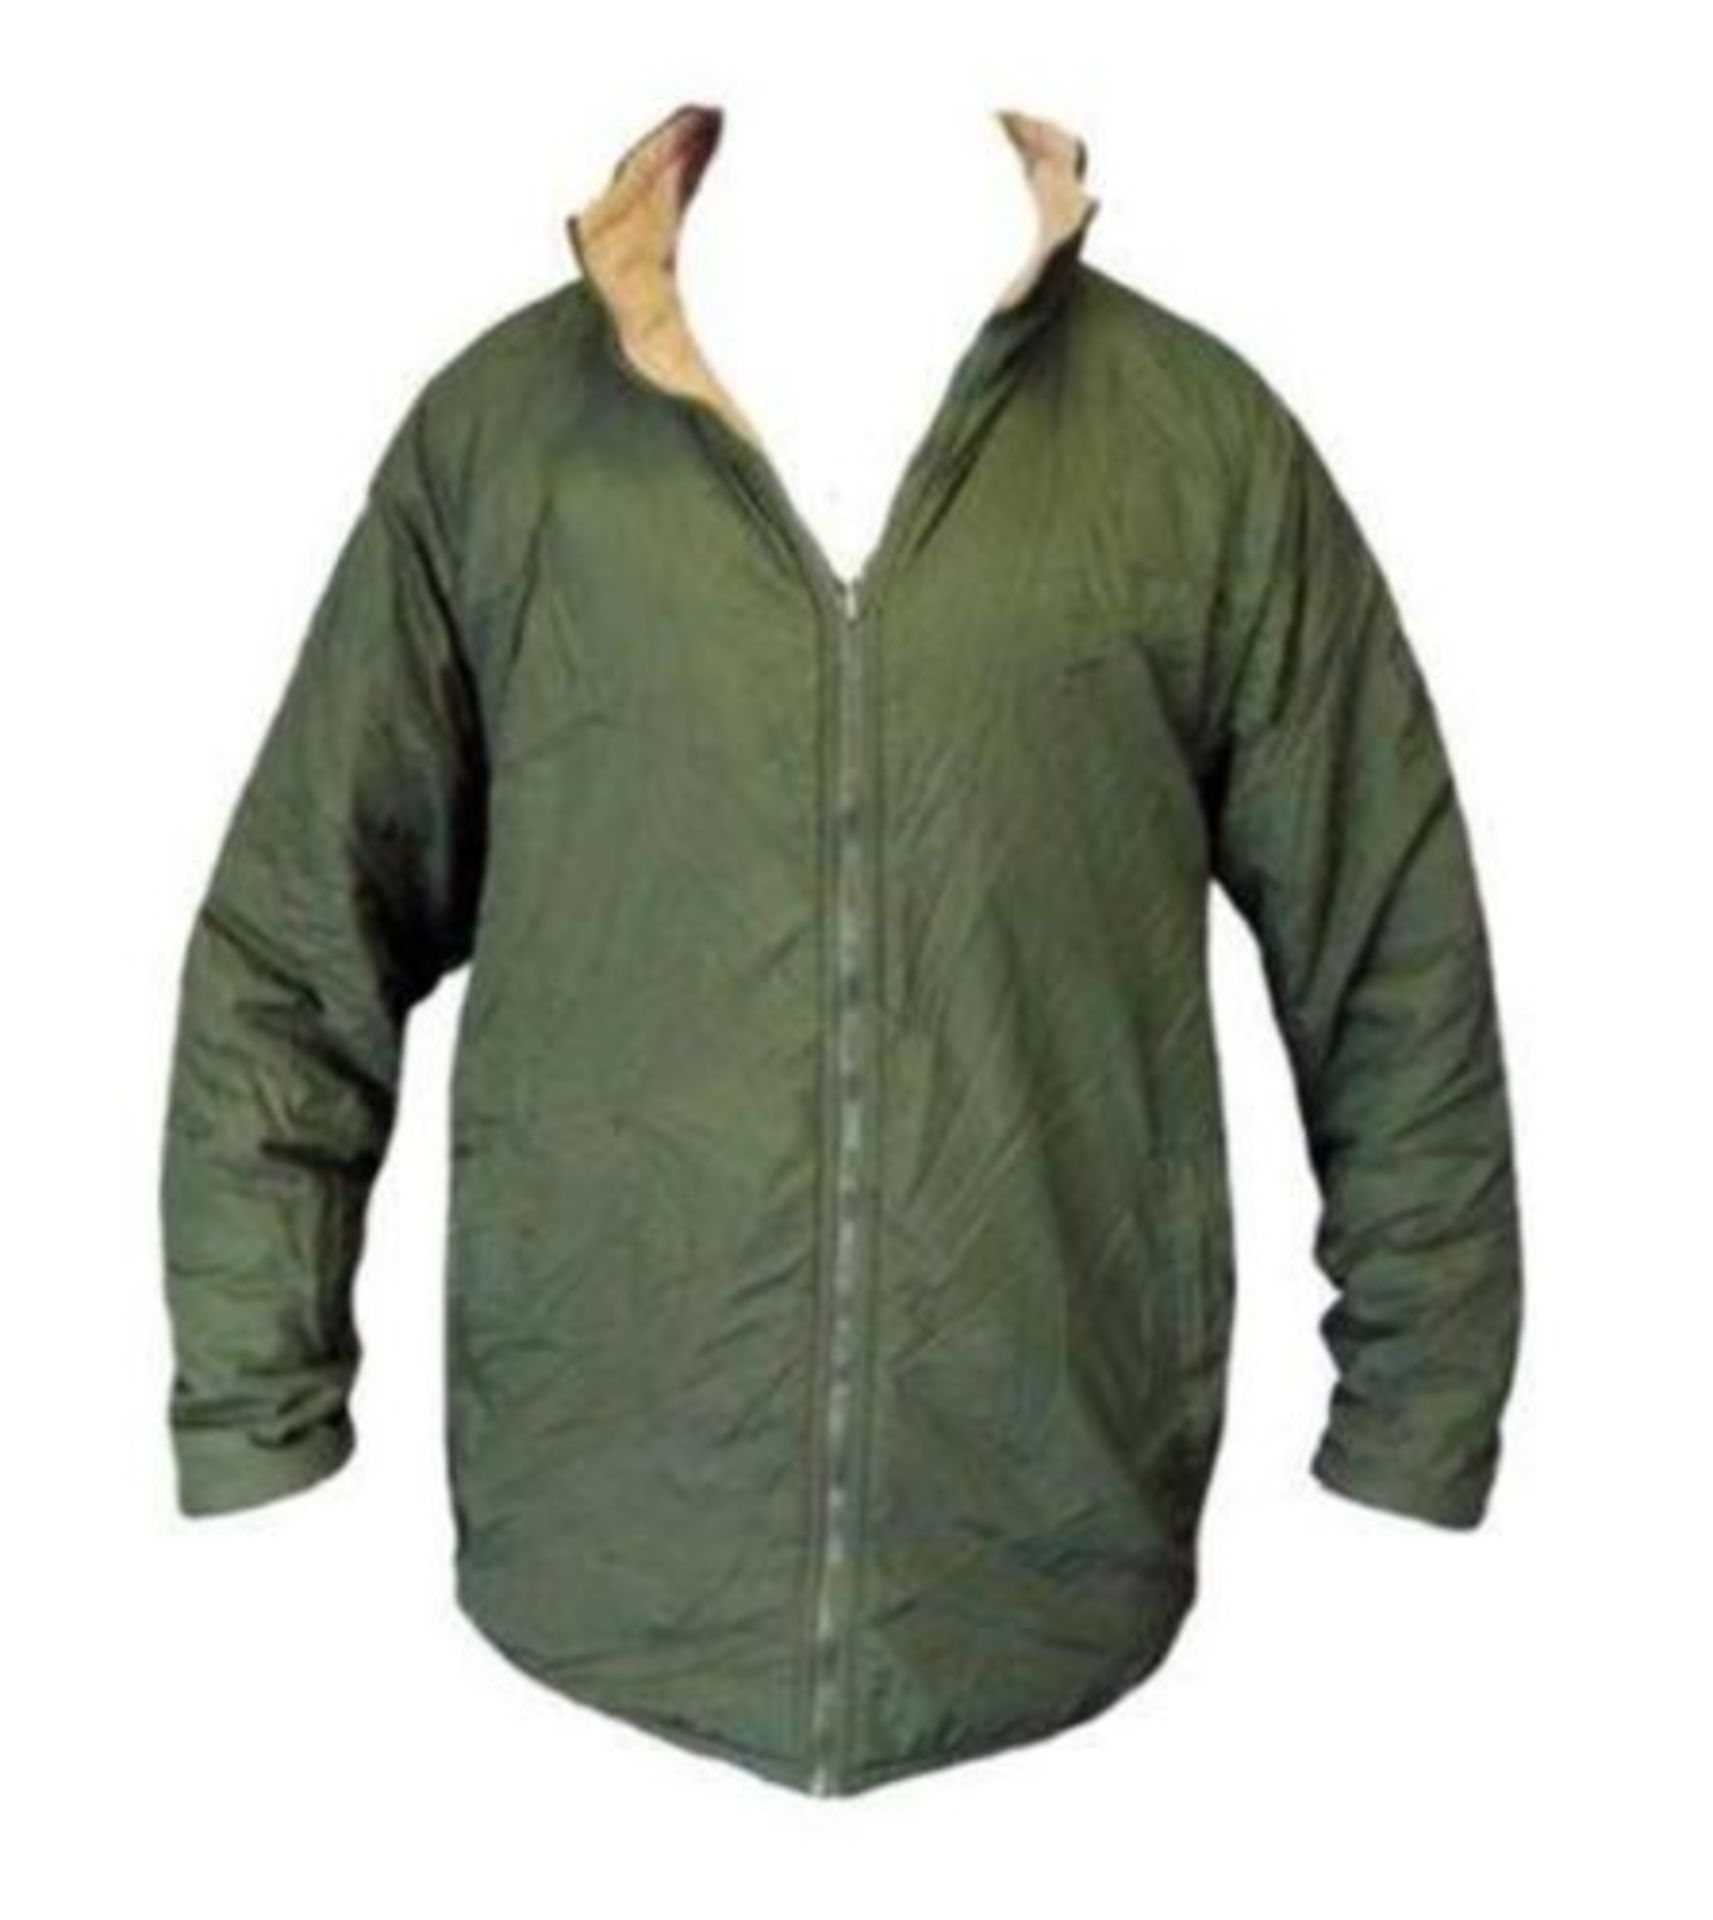 5 x Soft Thermal Reversible Over Jacket - Olive Green - Large - NEW